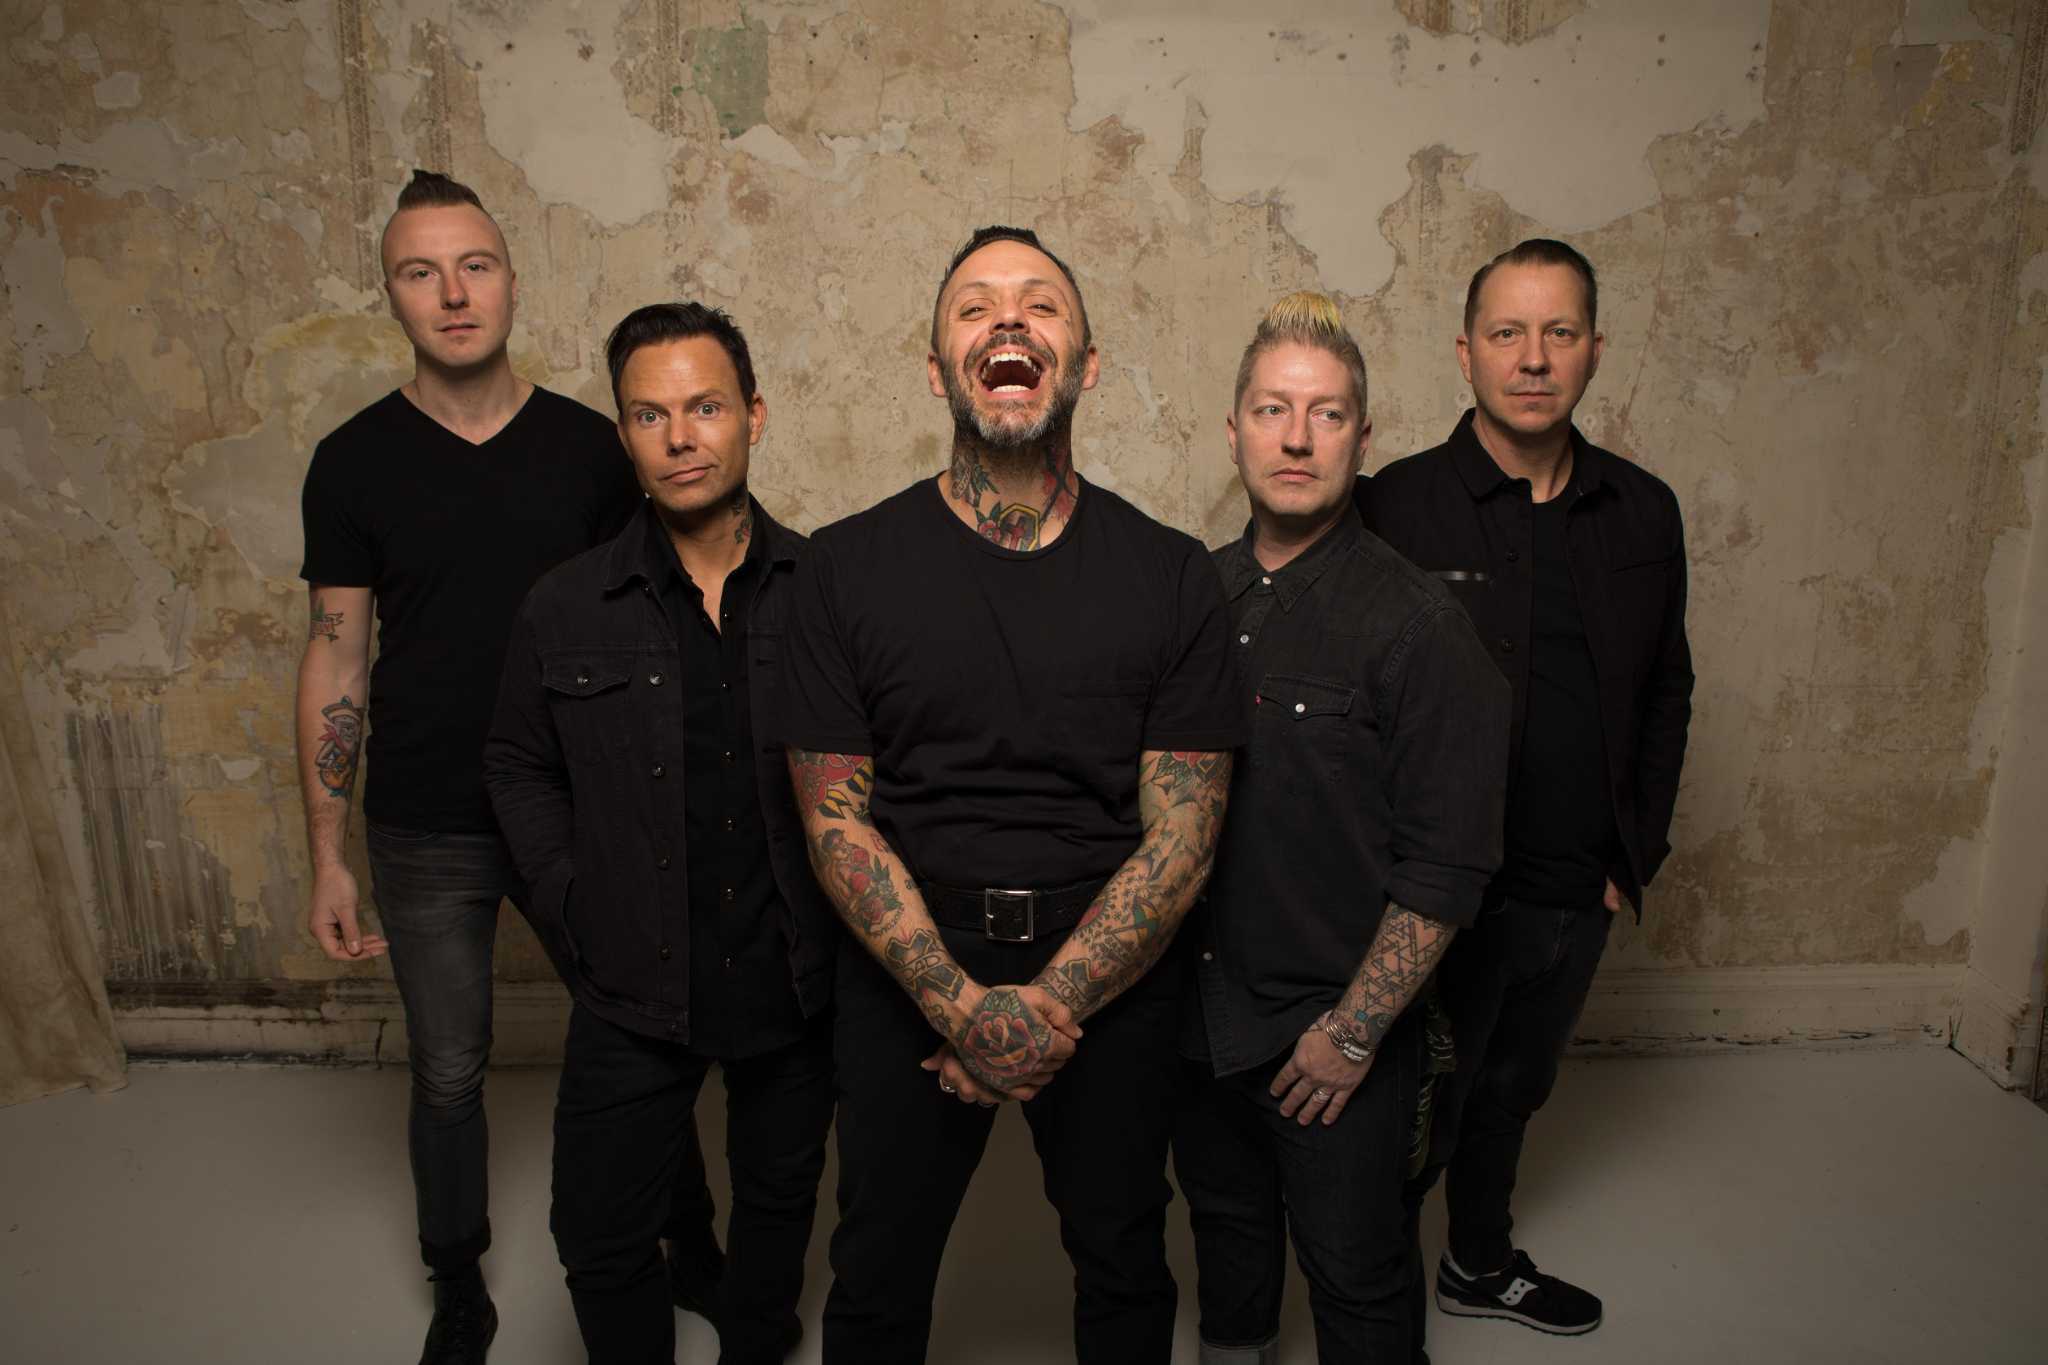 Houston band Blue October tackles mental illness, addiction in new